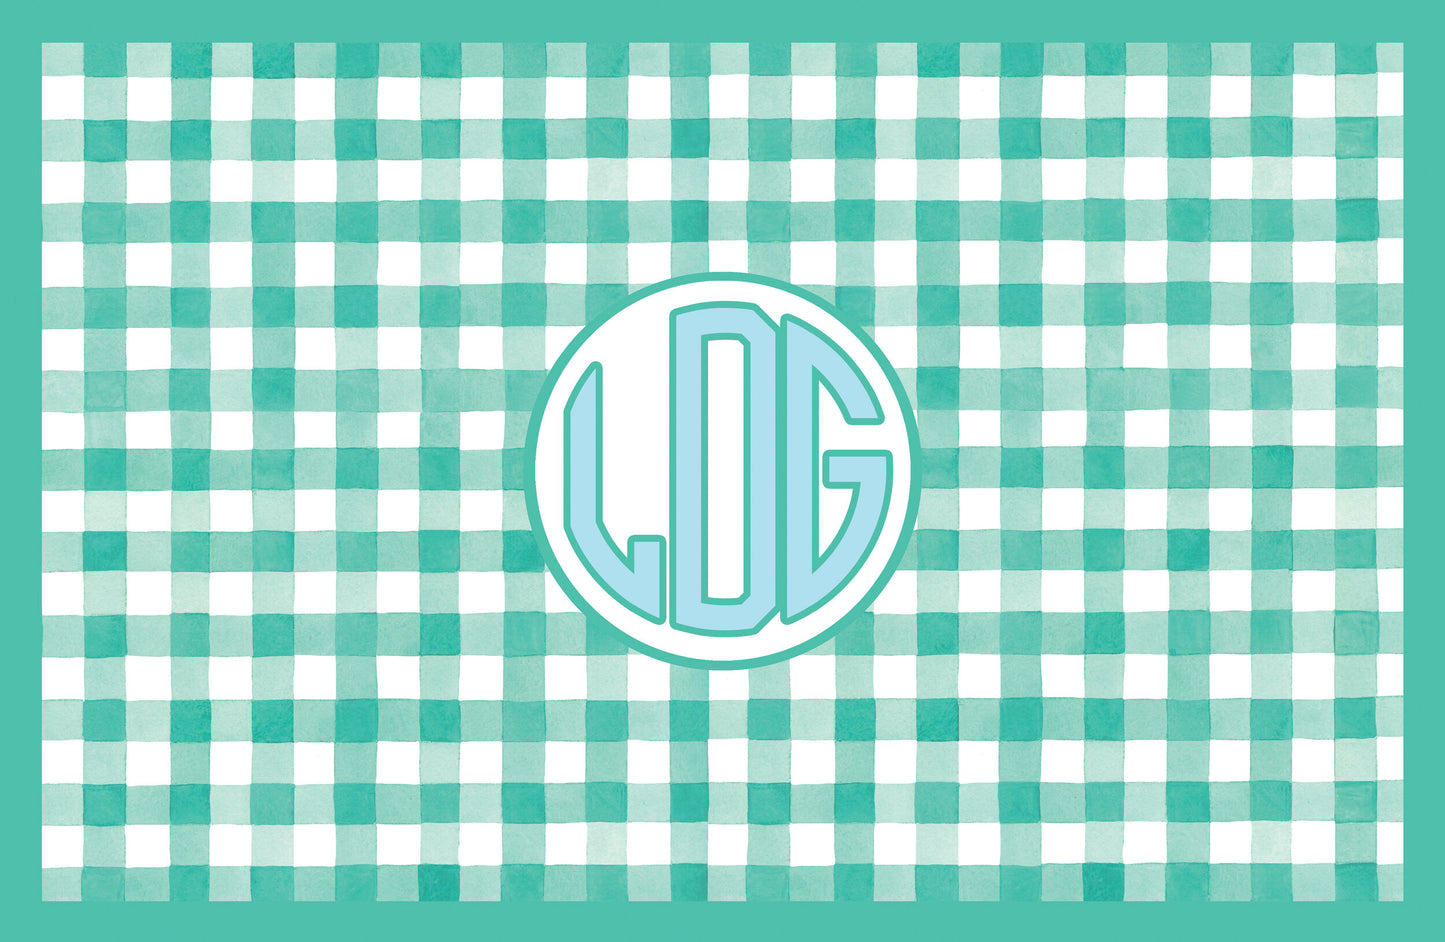 Paper placemat featuring a green gingham pattern with a teal circle monogram